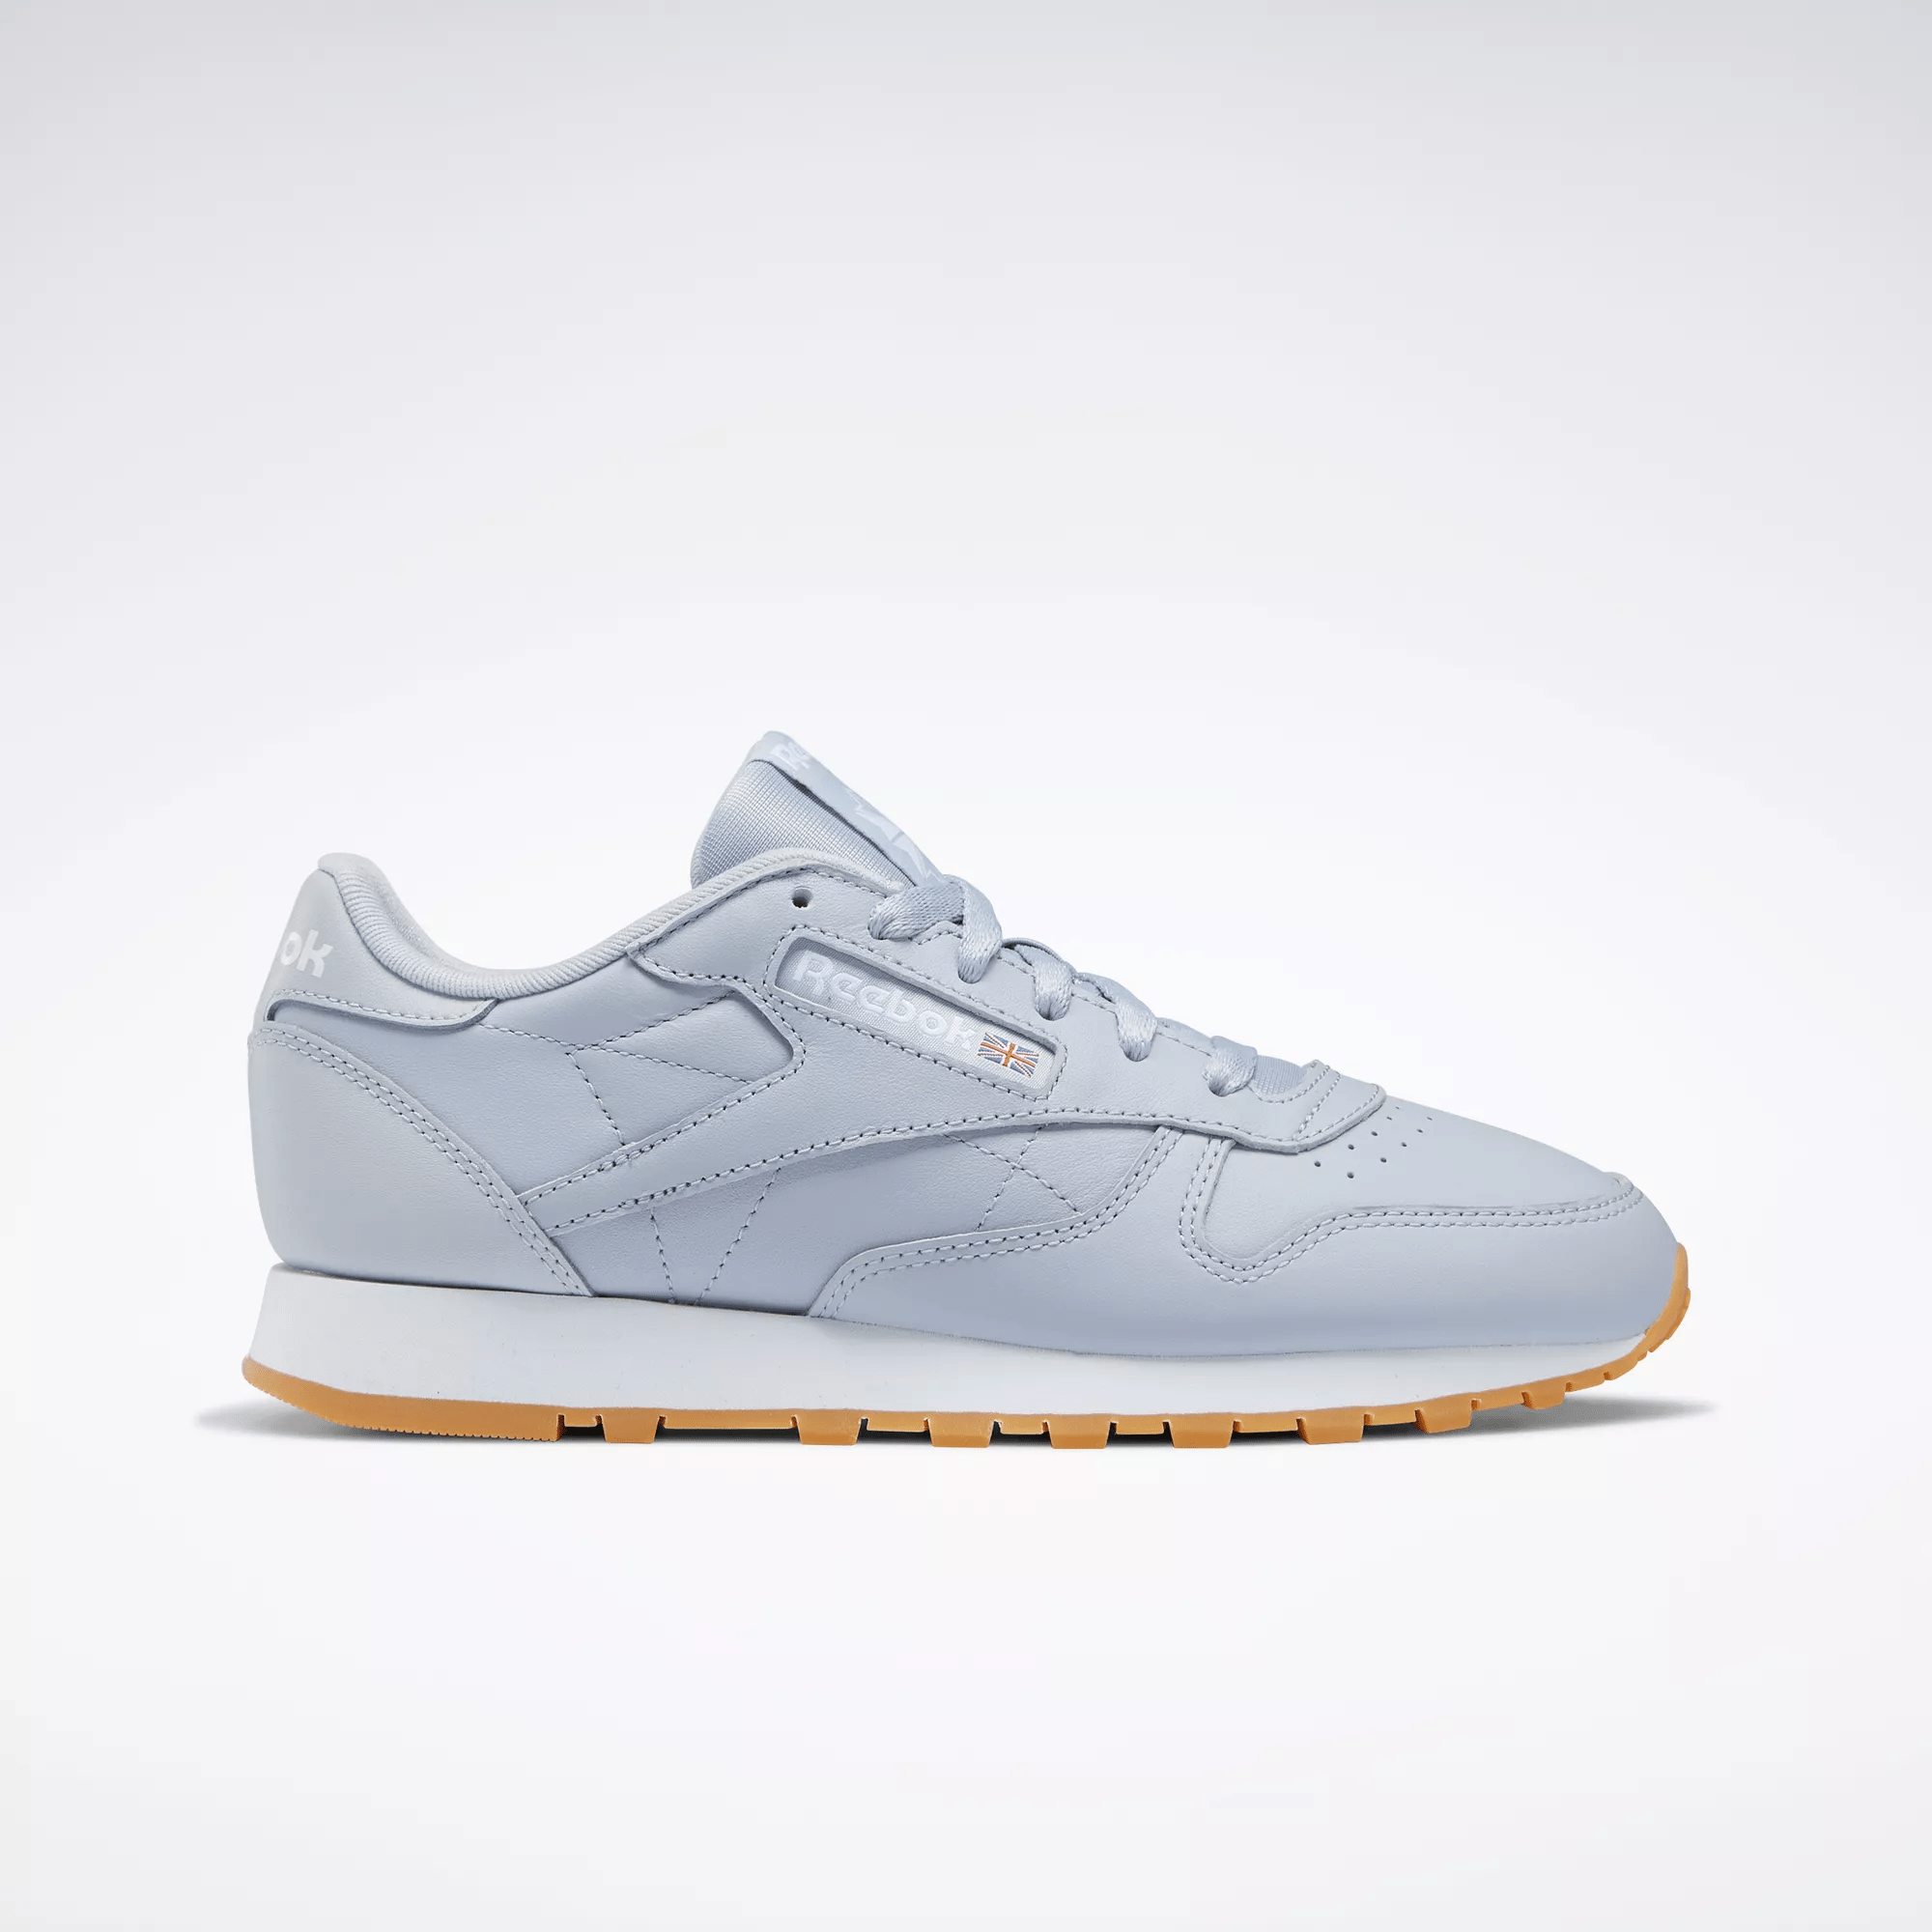 Reebok Classic Leather Shoes In Grey